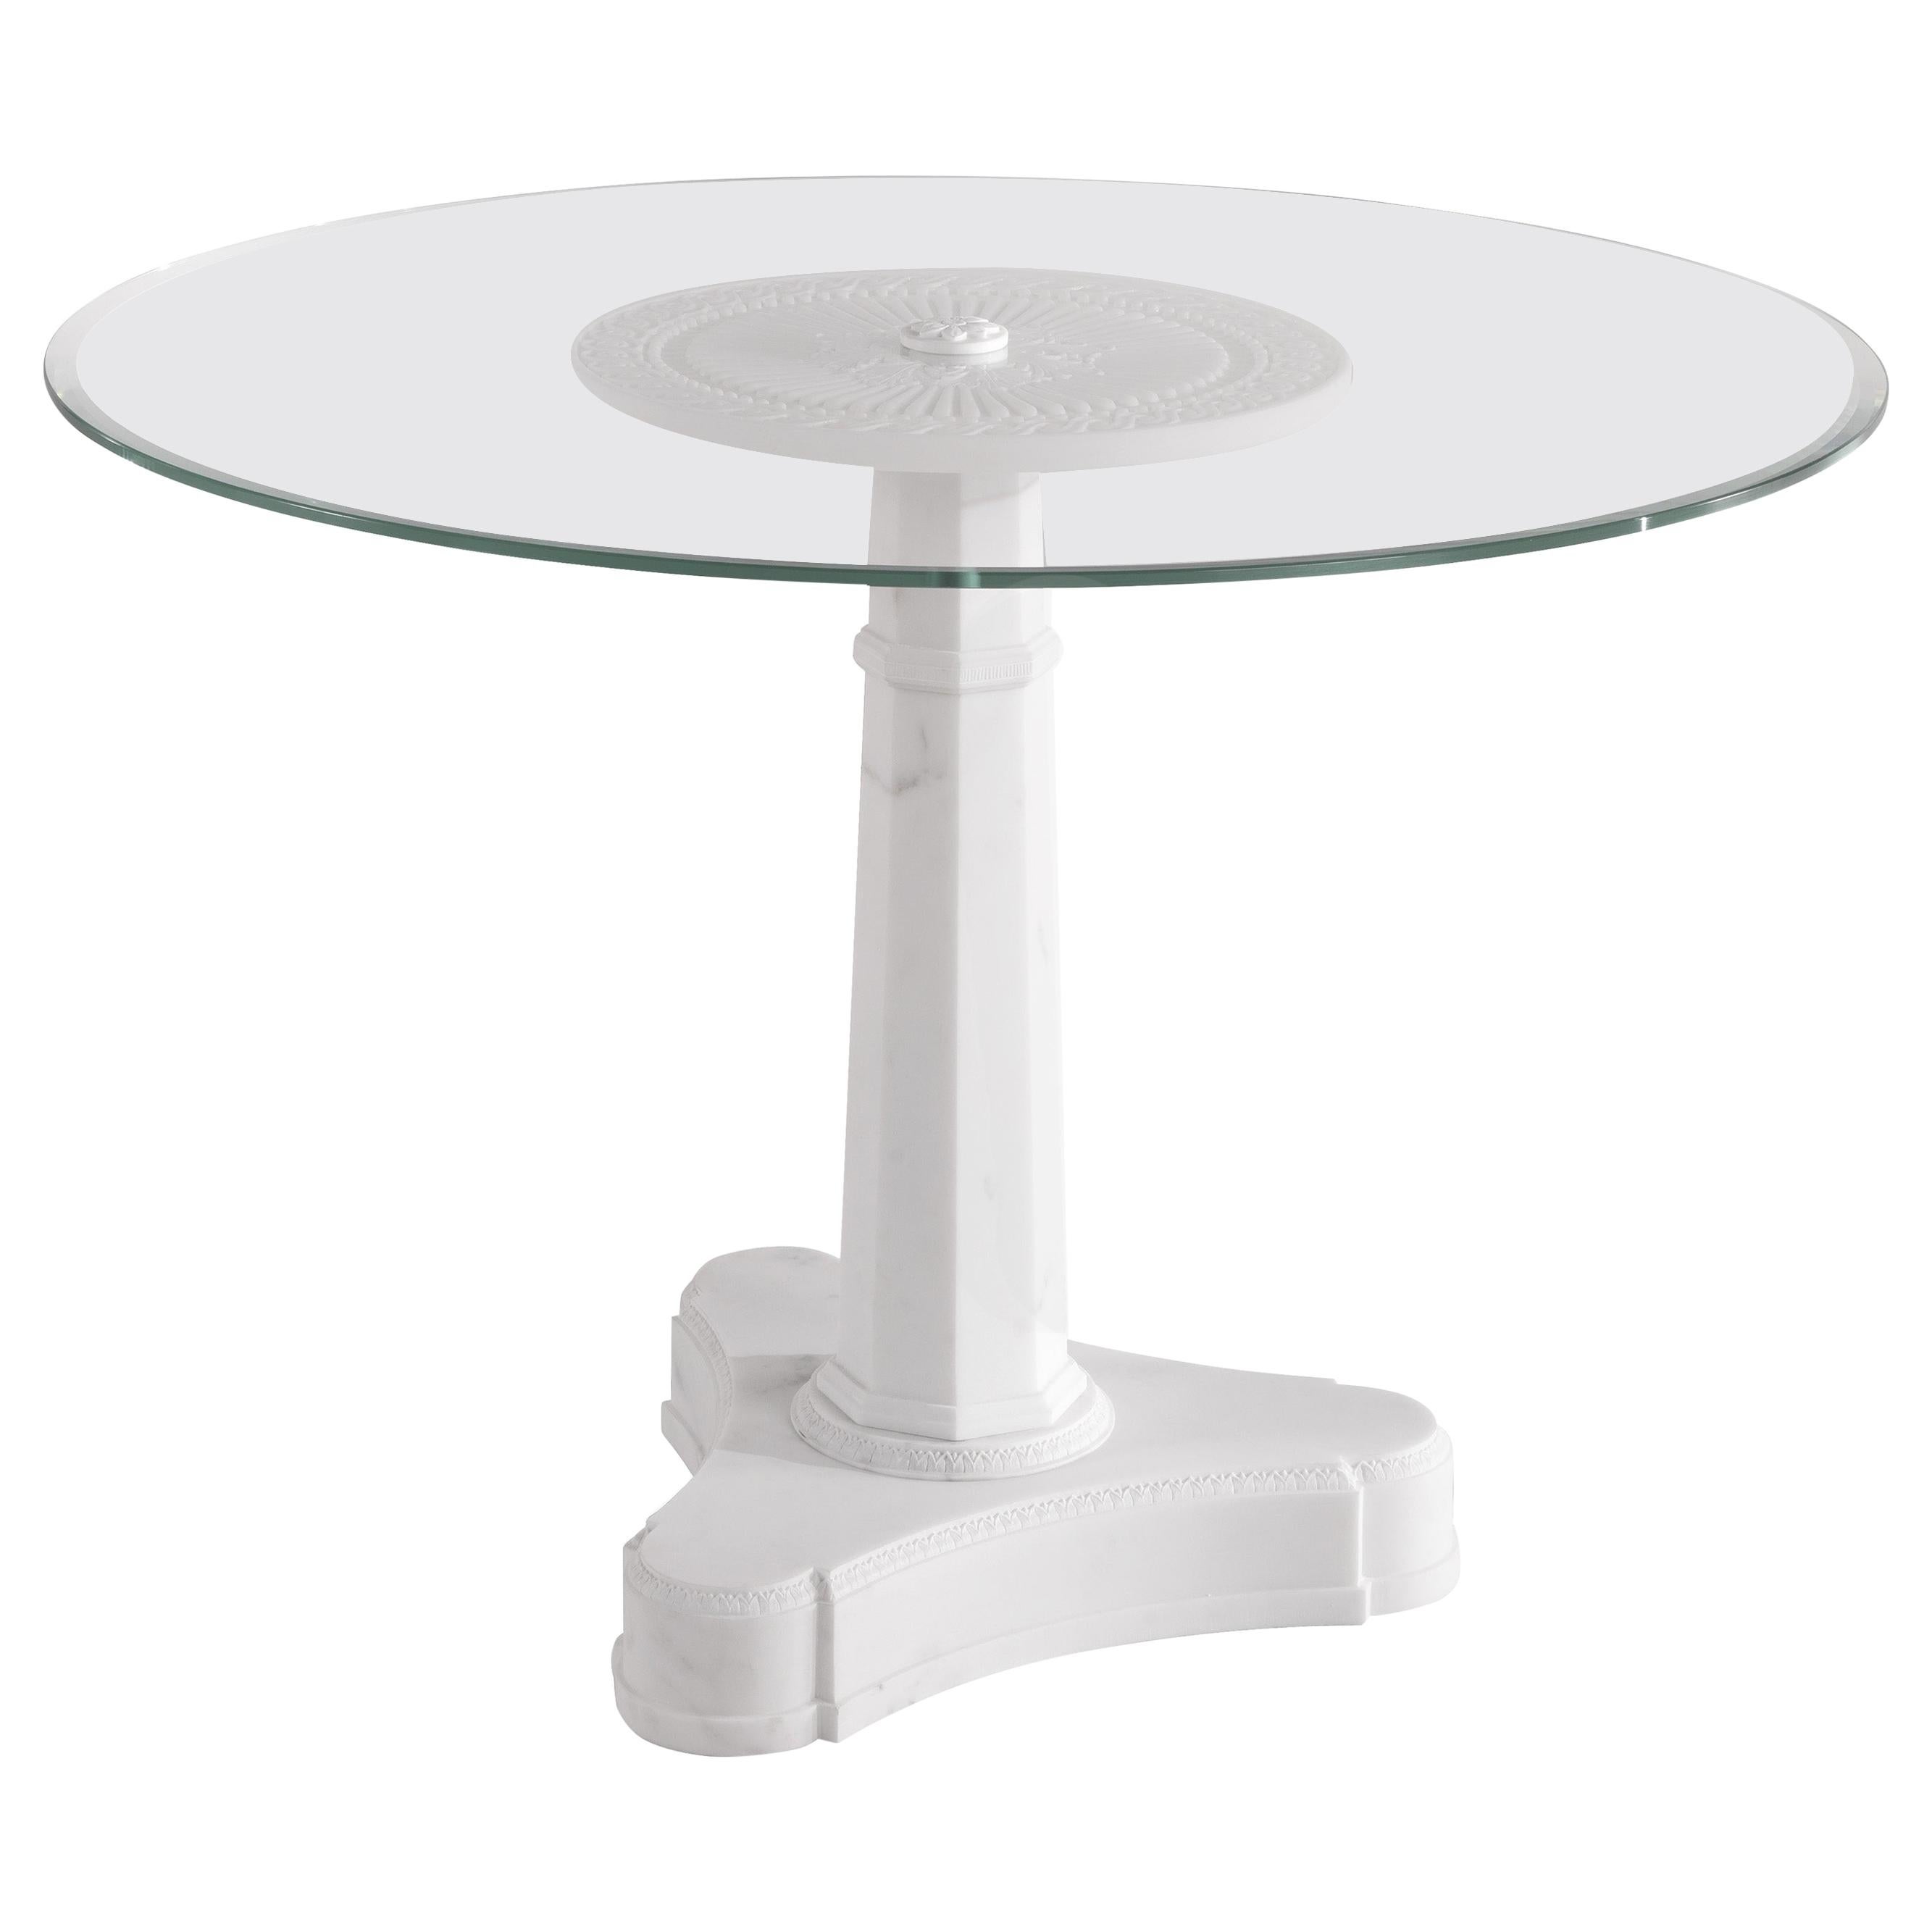 21st Century Relief Side Table in White Statuario Marble with Engraved Details